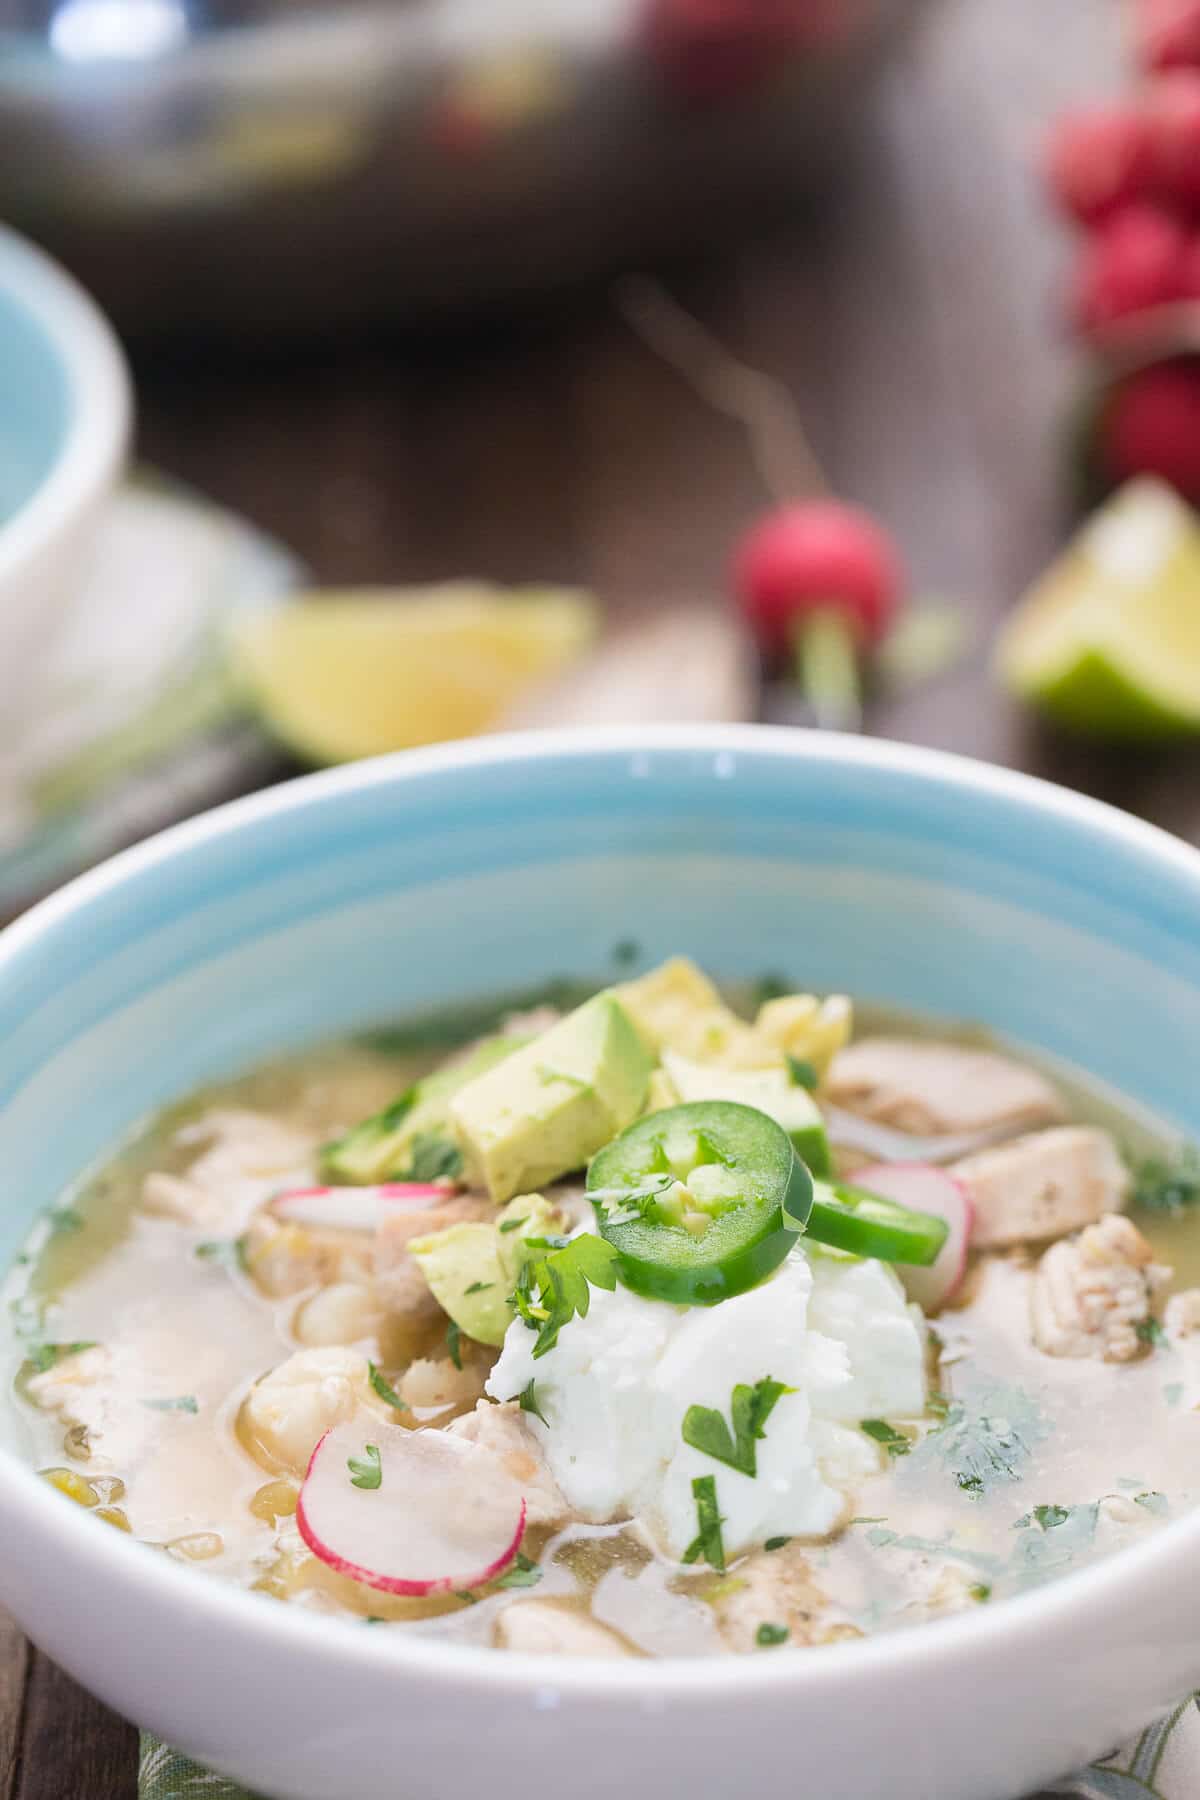 This turkey posole is so amazing! Not only is it simple and quick, but the taste is out of this world!